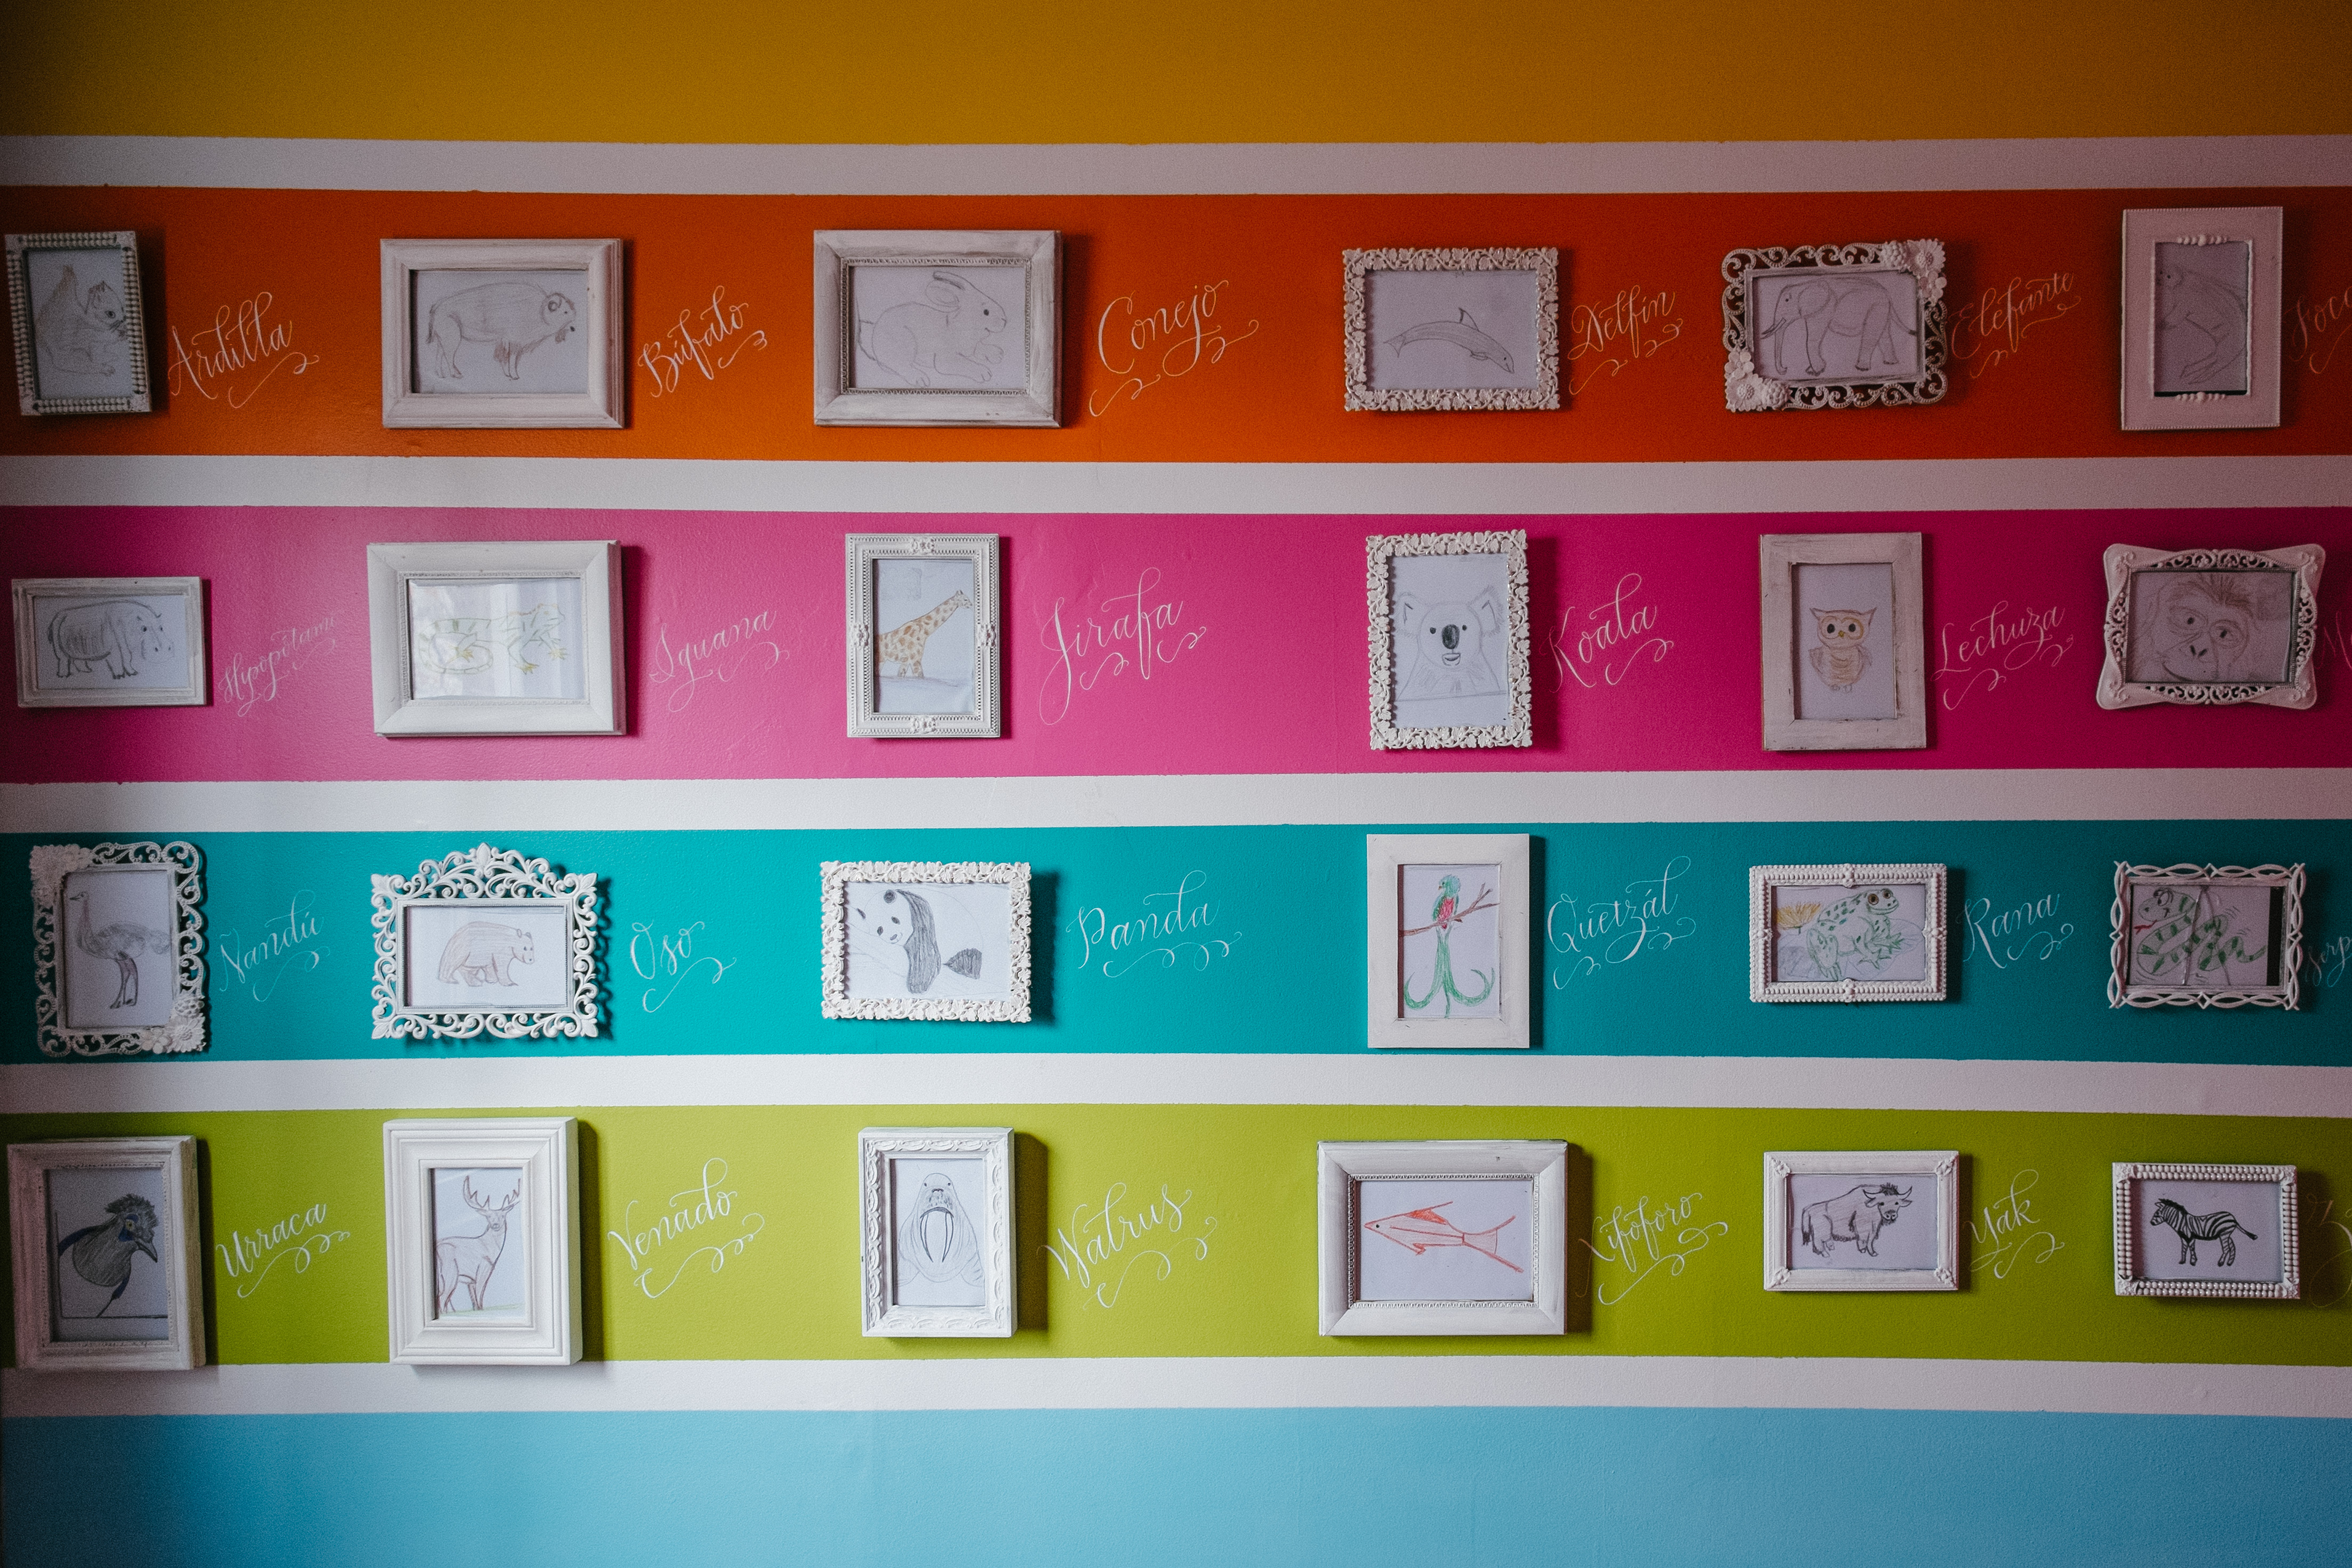 Rainbow Striped Nursery Wall with Animal Lettering and Words in Frames